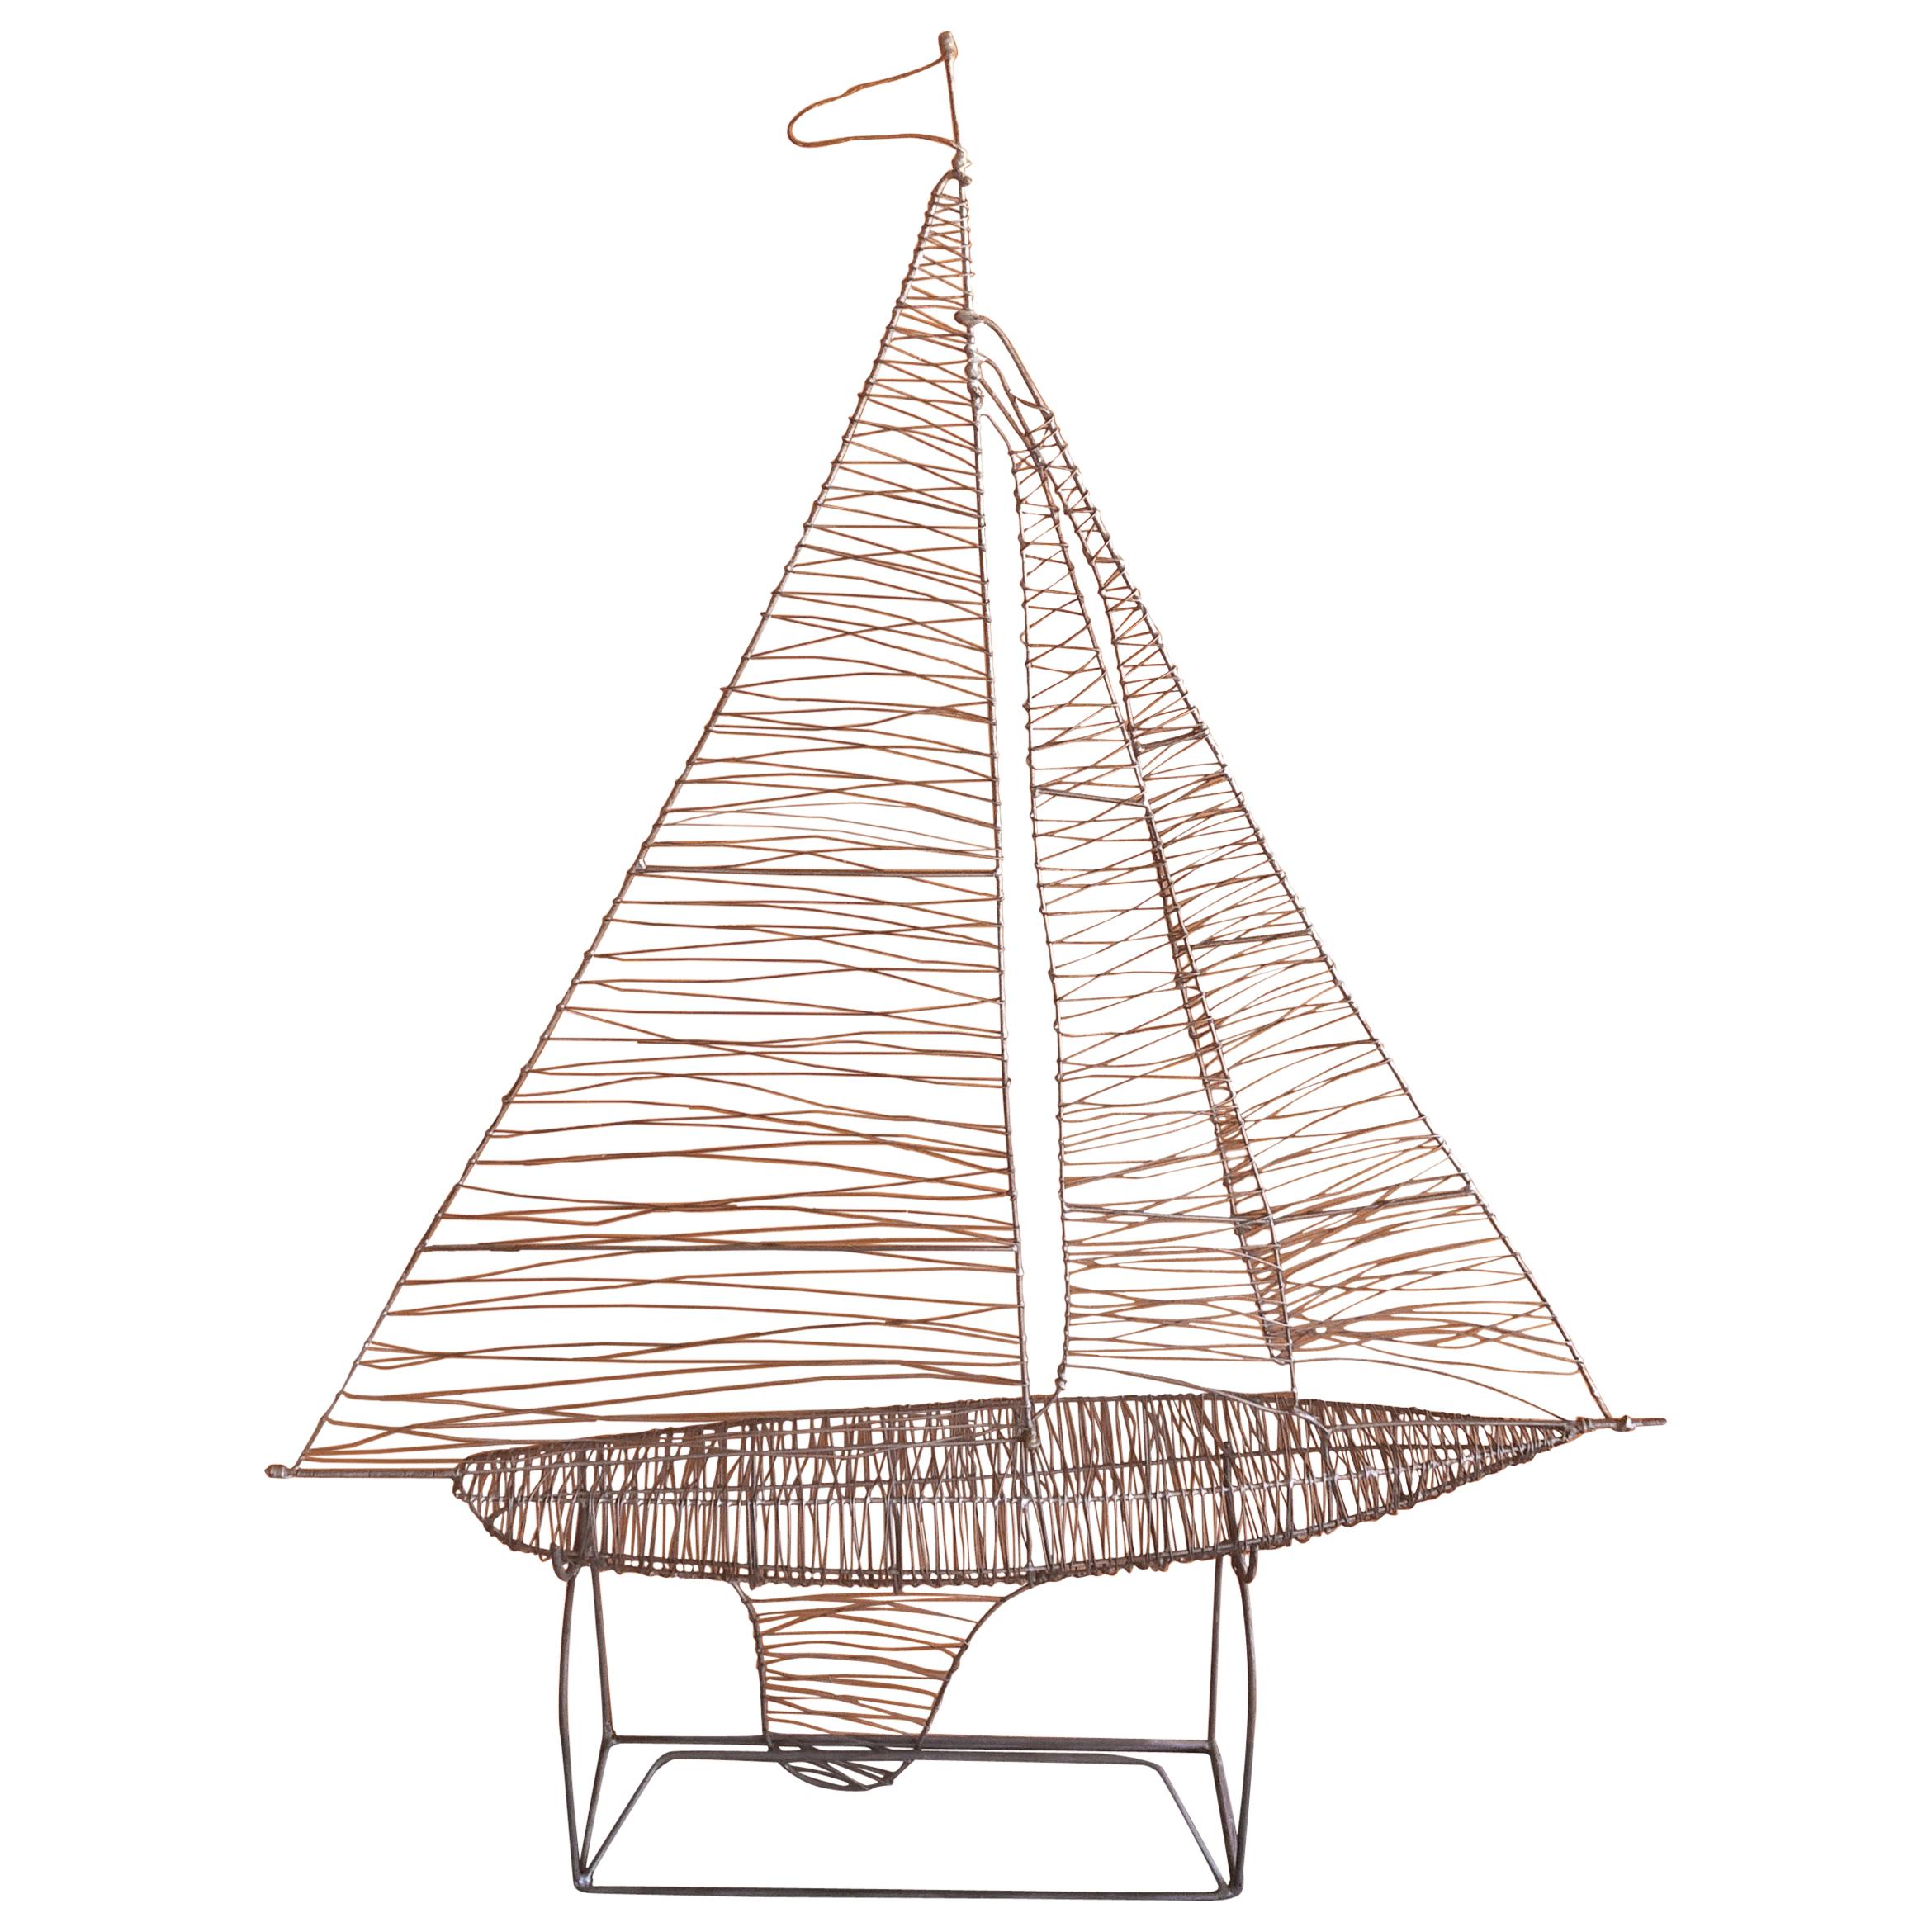 Handmade Wire Sailboat Sculpture with Stand